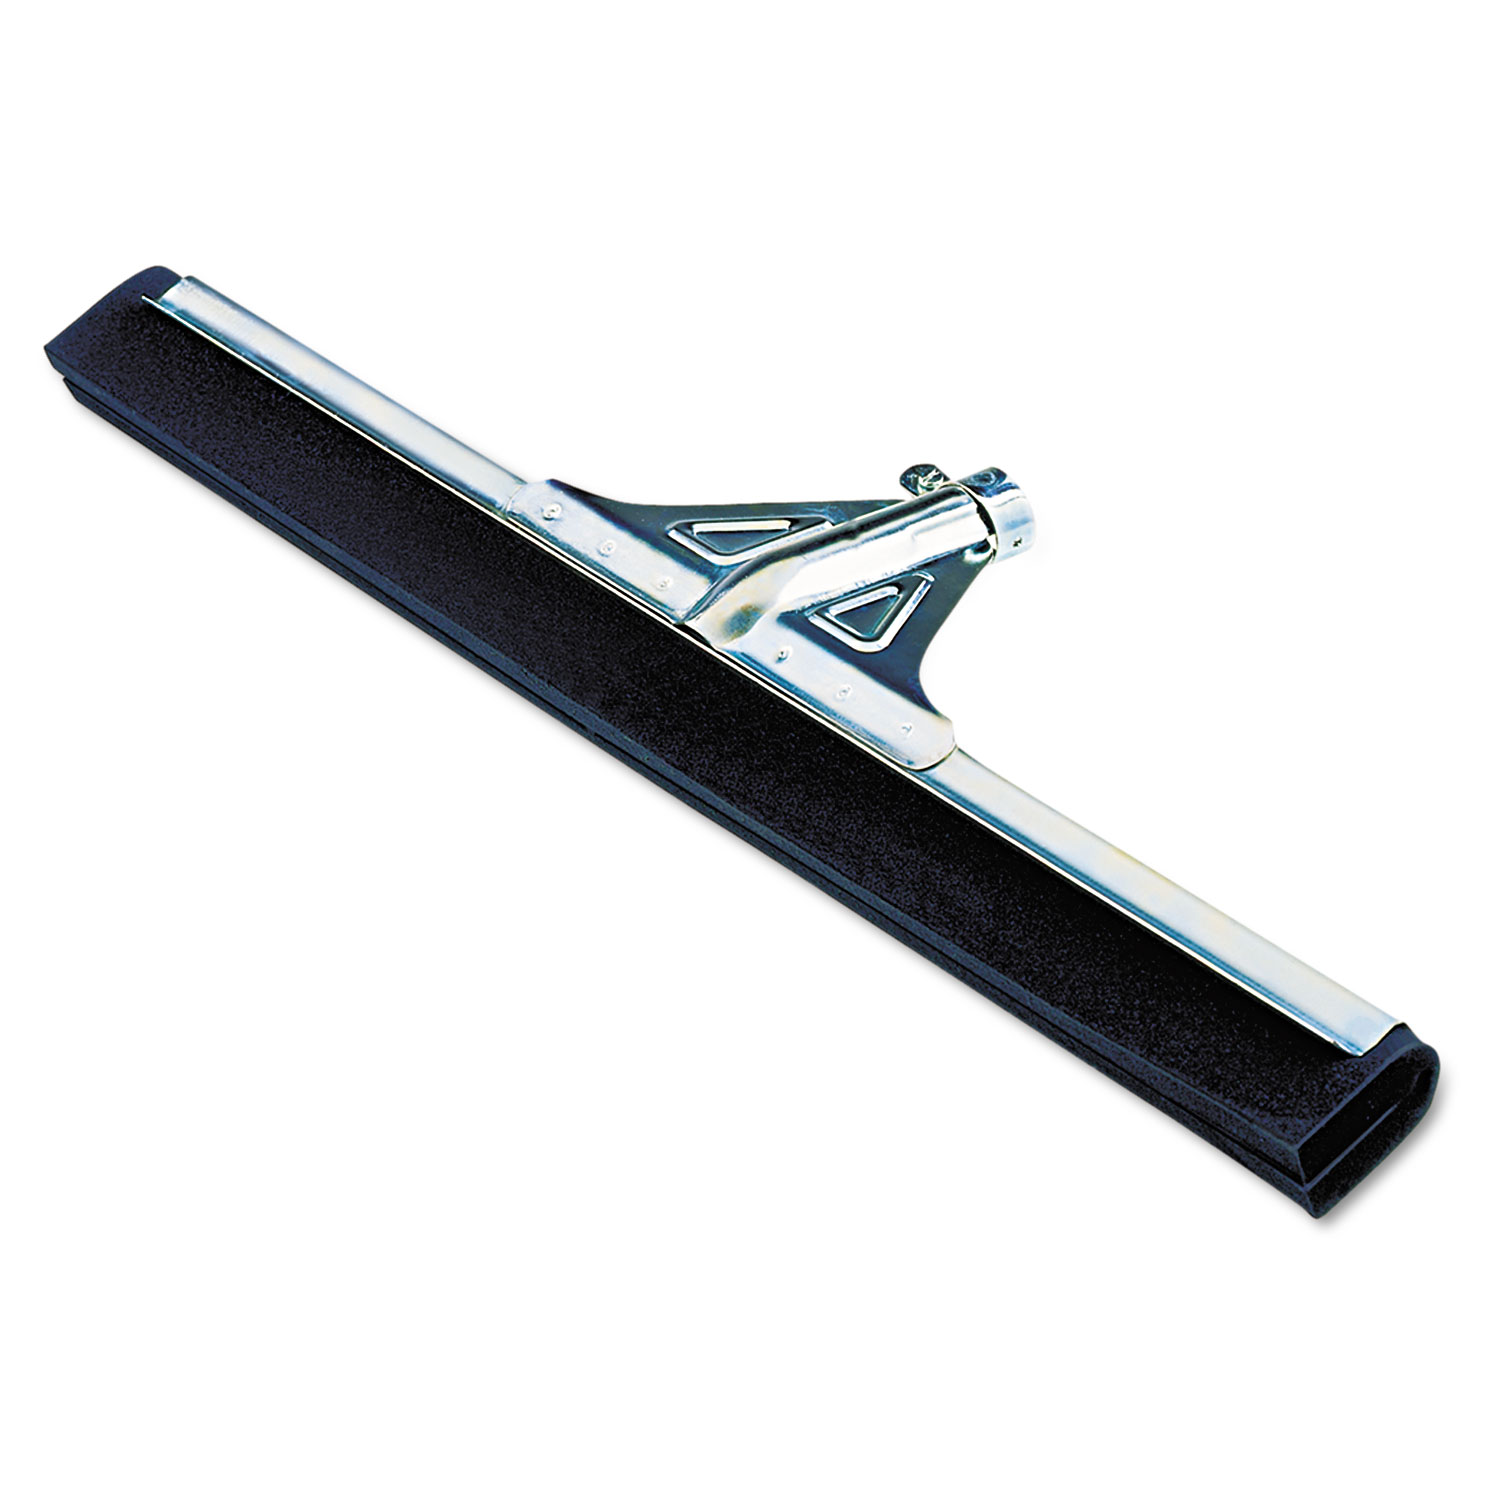  Unger HM550 Heavy-Duty Water Wand Squeegee, 22 Wide Blade (UNGHM550) 